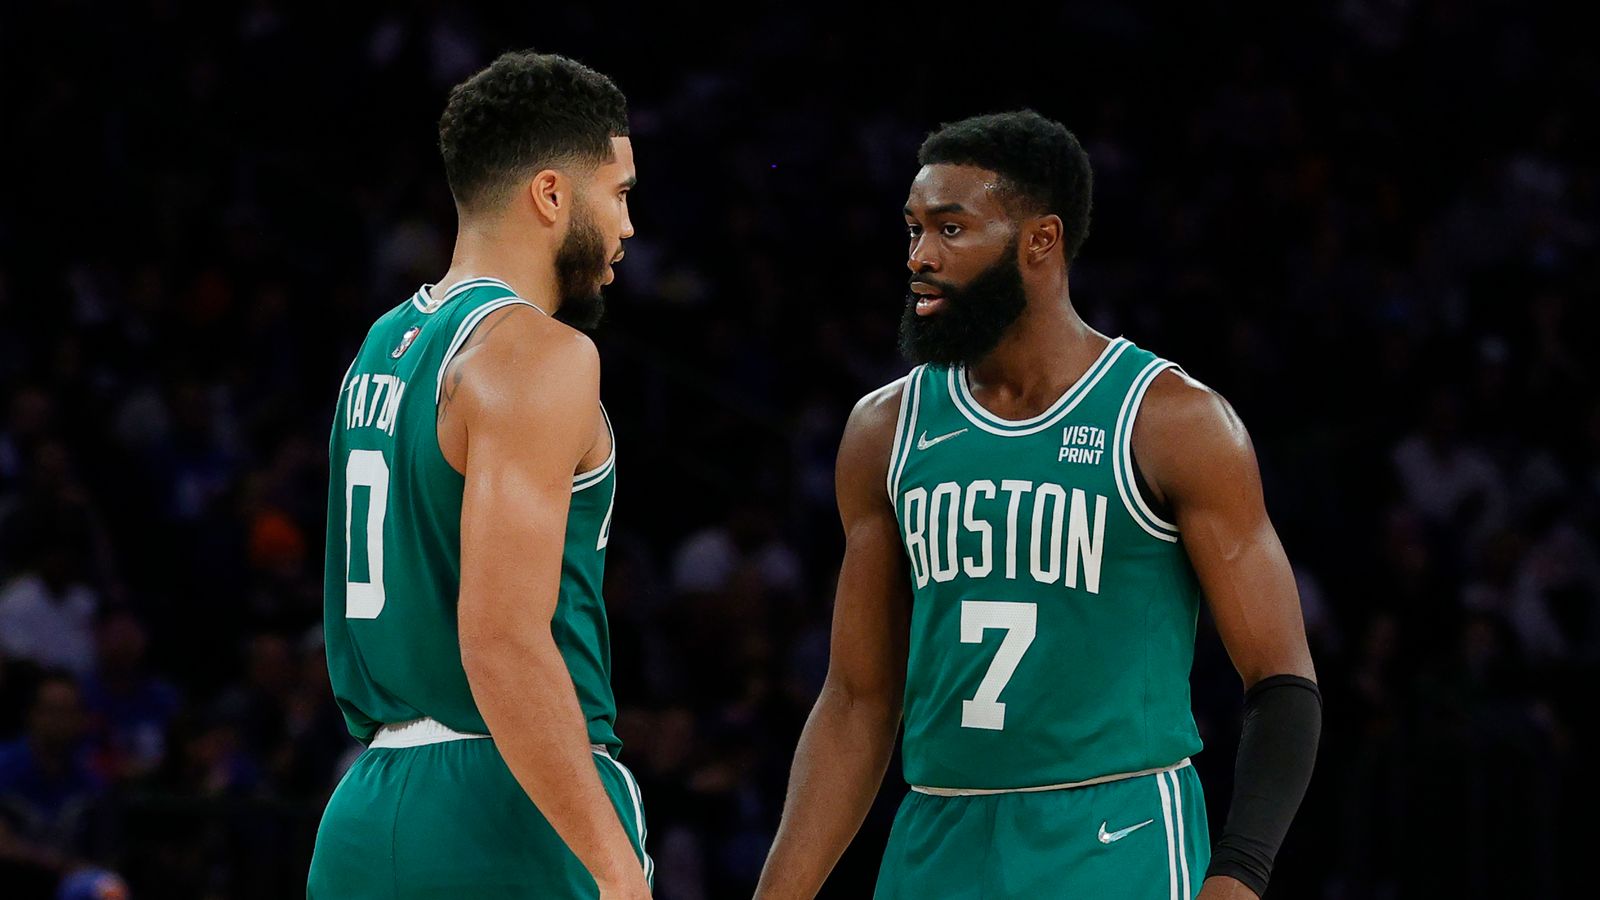 Marcus Smart Calls Out Jayson Tatum And Jaylen Brown: “They Don't